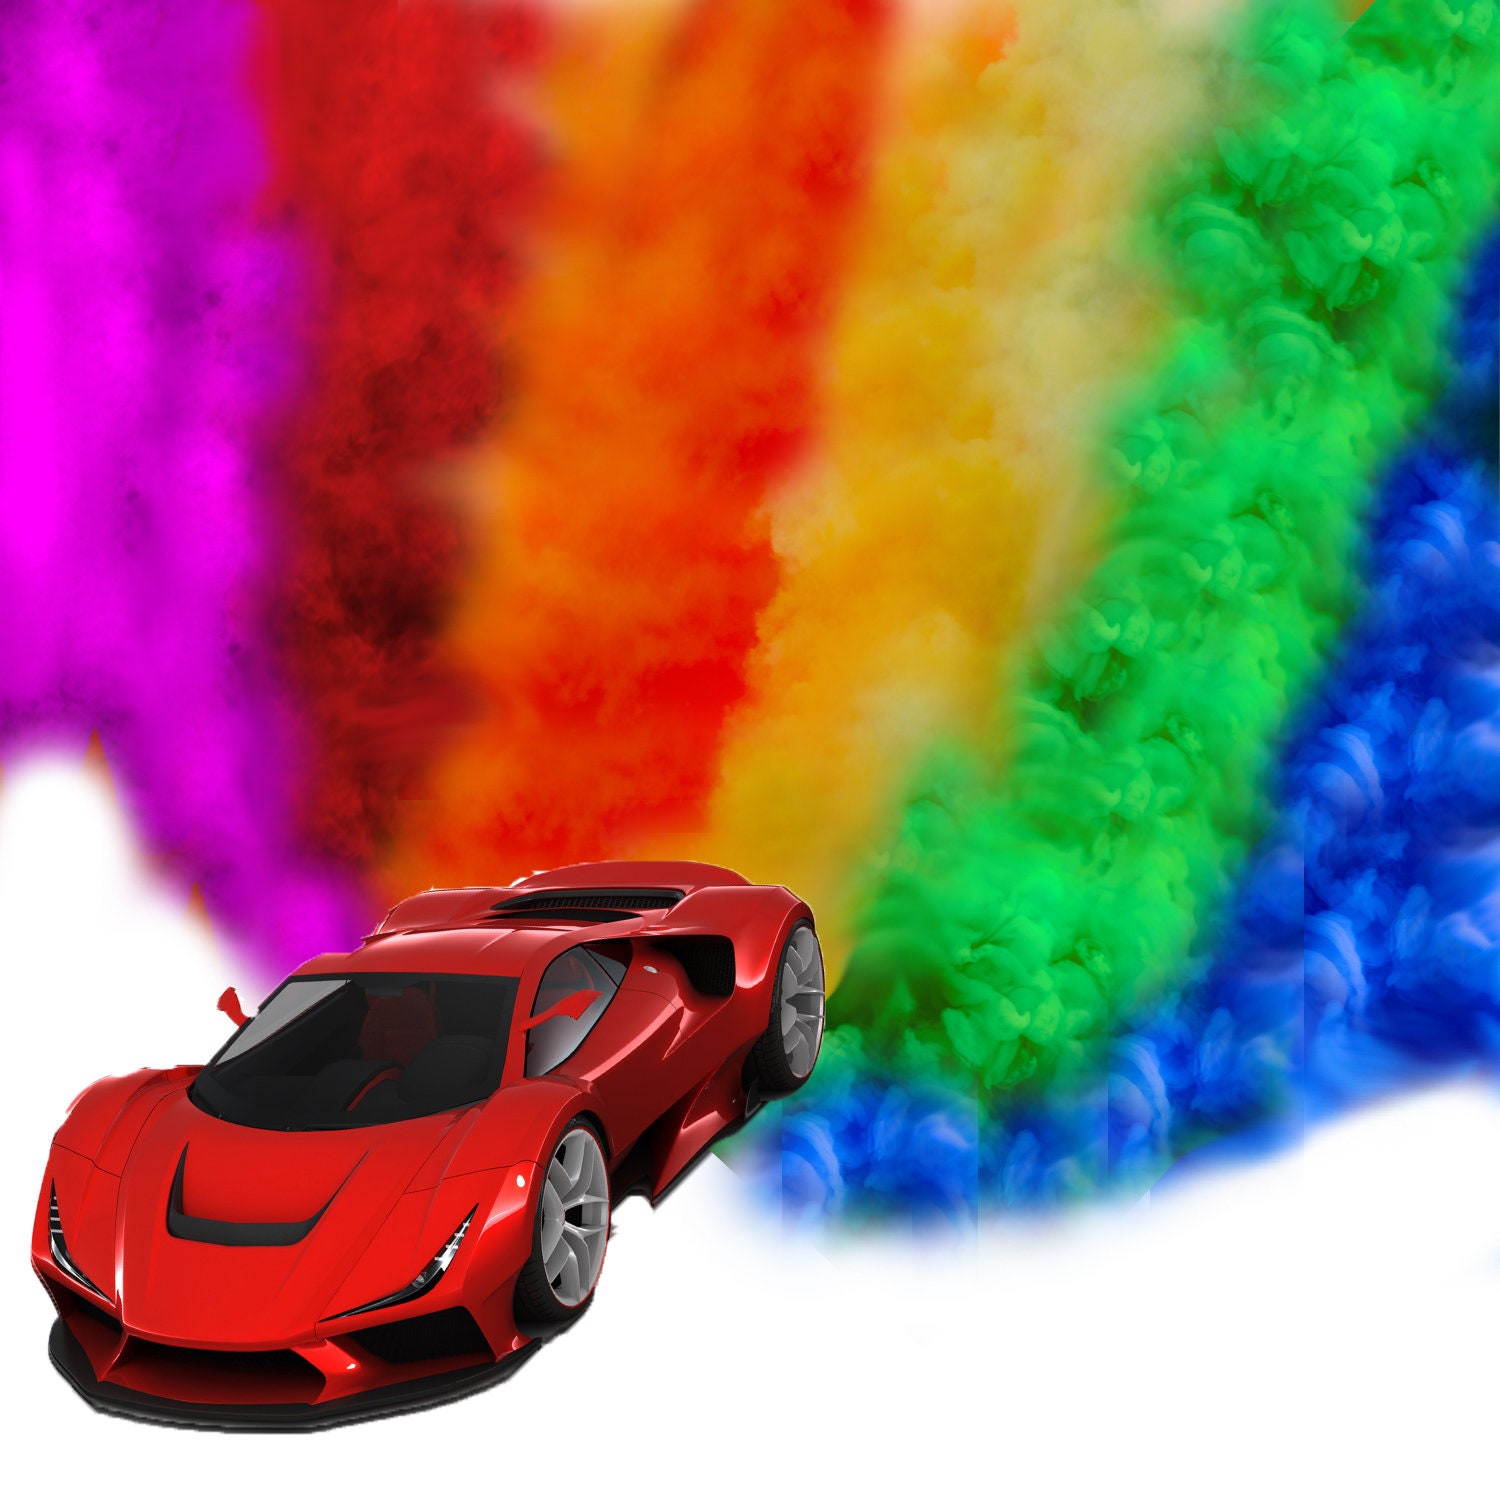  Excite Colors - Gender Reveal Powder - Blackout Bags, Car  Burnout Tire Pack, Exhaust Smoke Kit